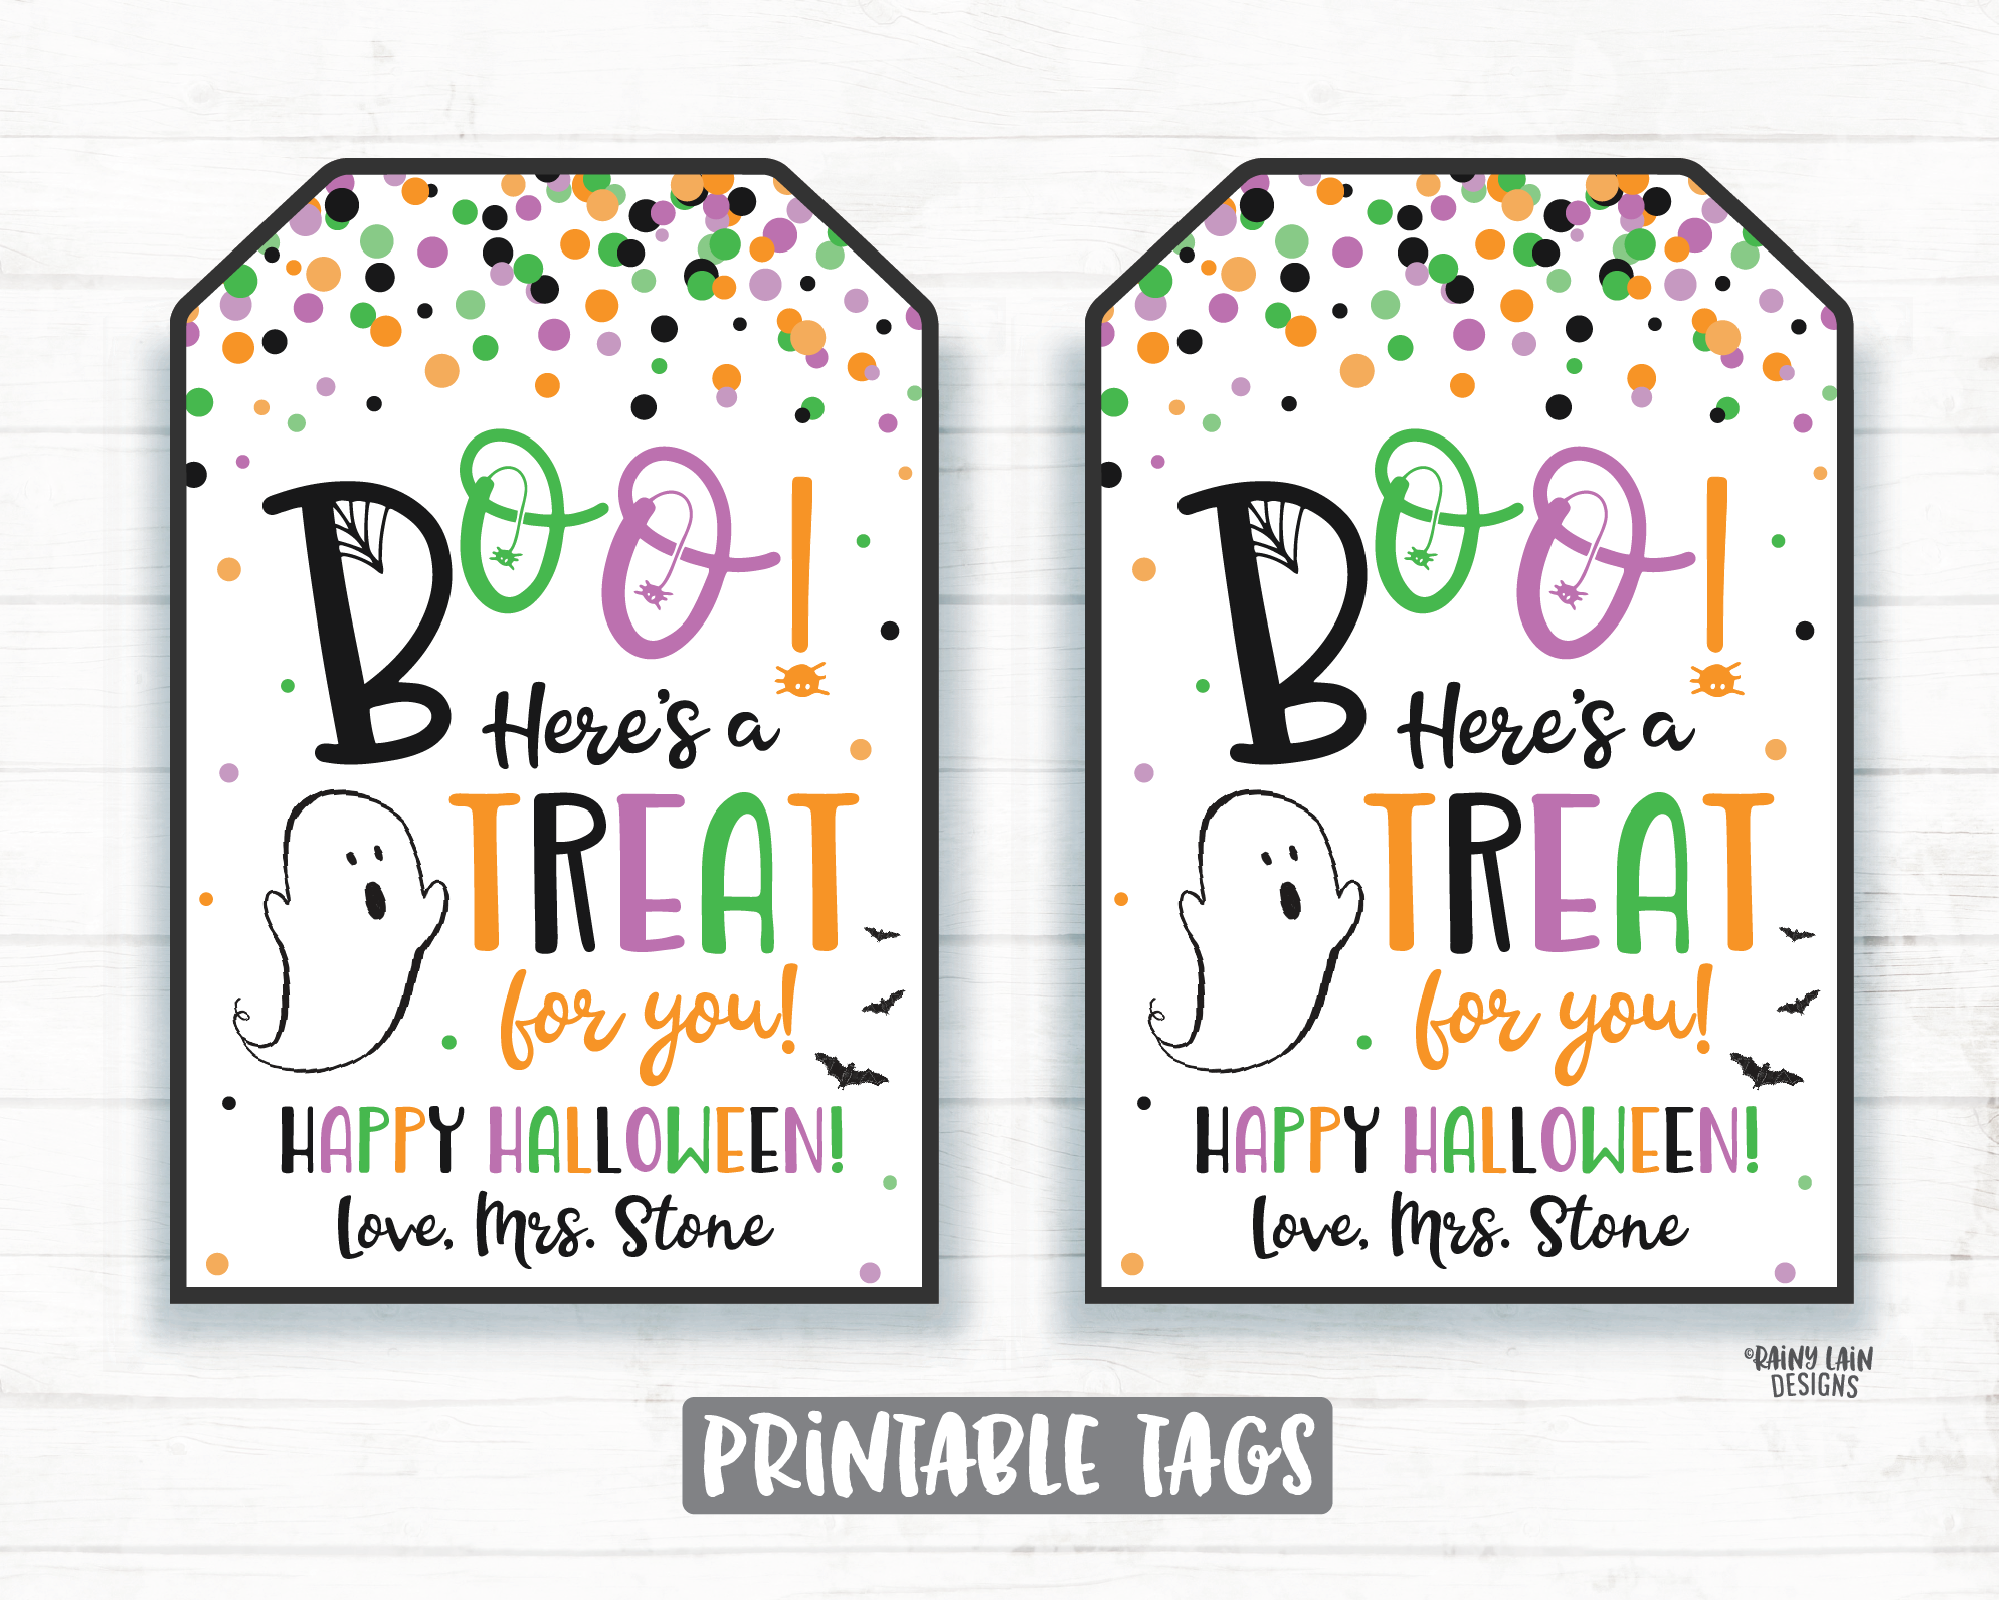 Hey Boo Here's a Treat for you Tags Halloween Printable Halloween Tag Editable Halloween Favor Tags Pumpkin Ghost Bats Spiderweb Party Tags